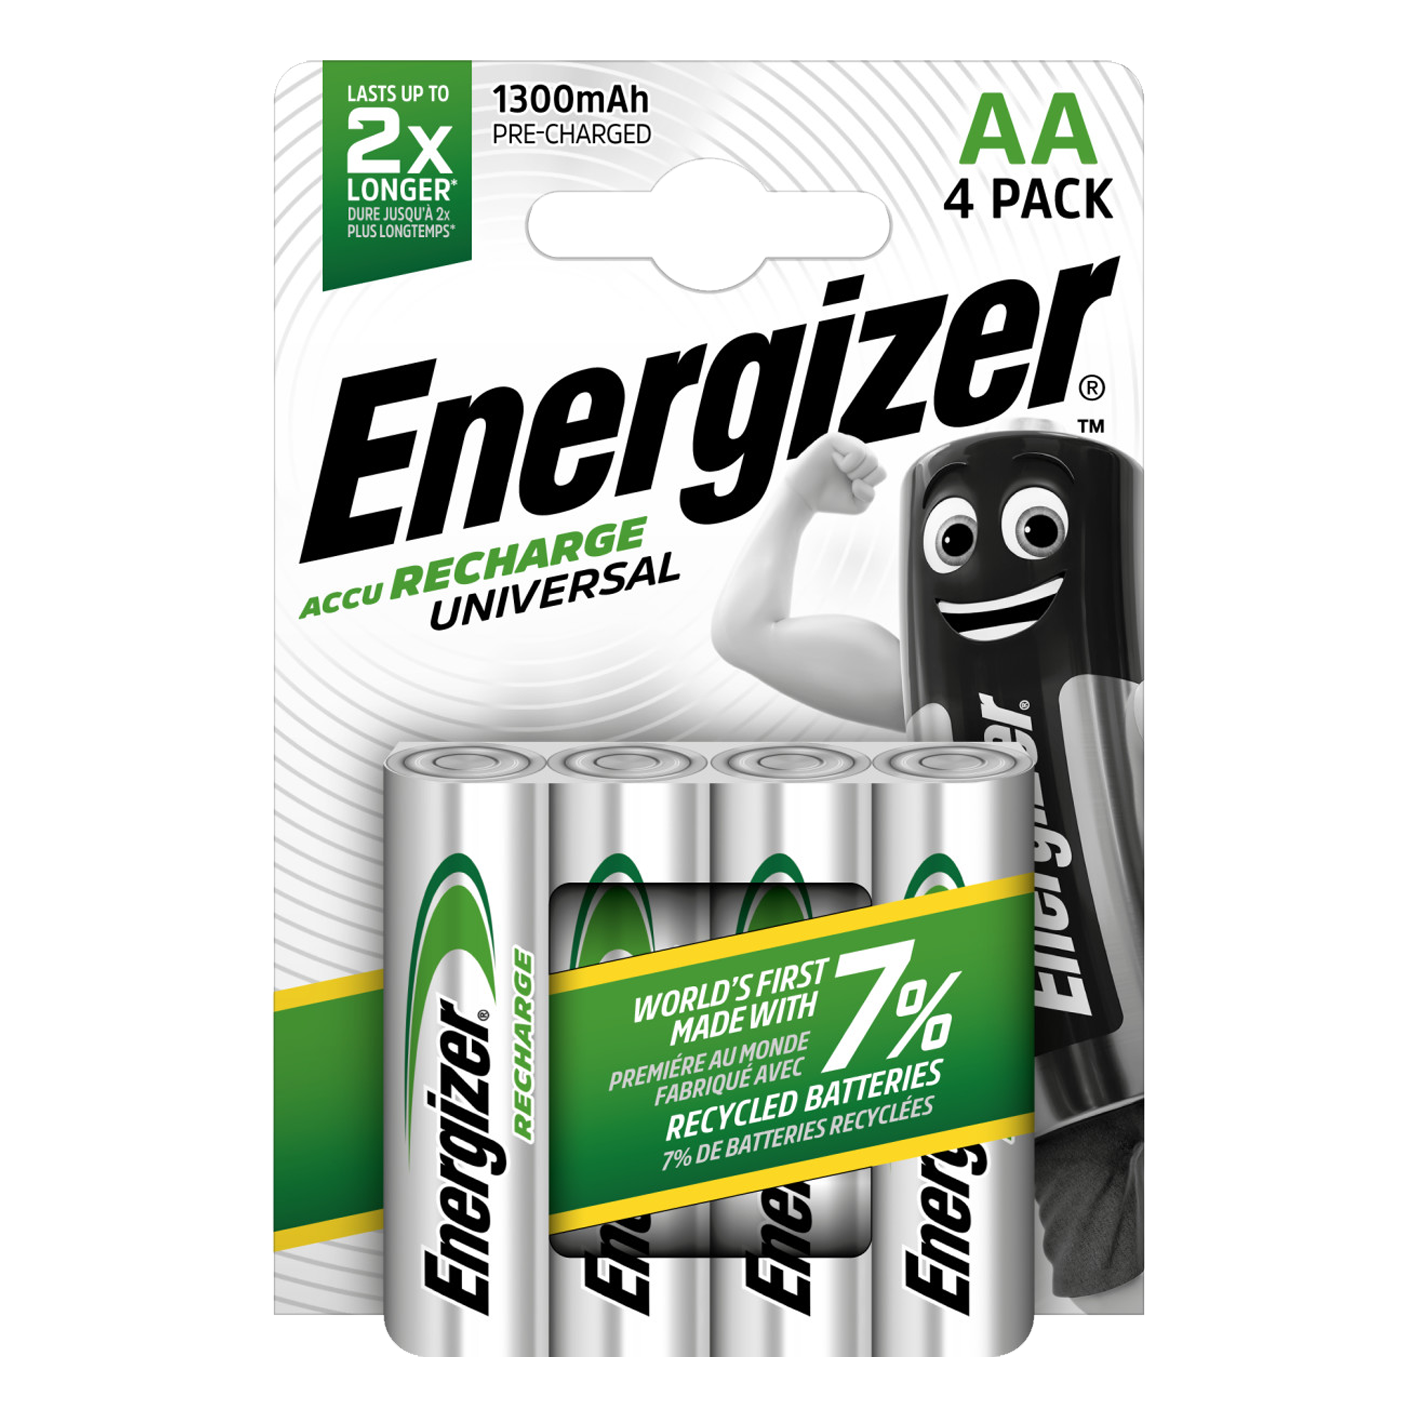 Energizer AA 1300mAh Recharge Universal, Pack of 4